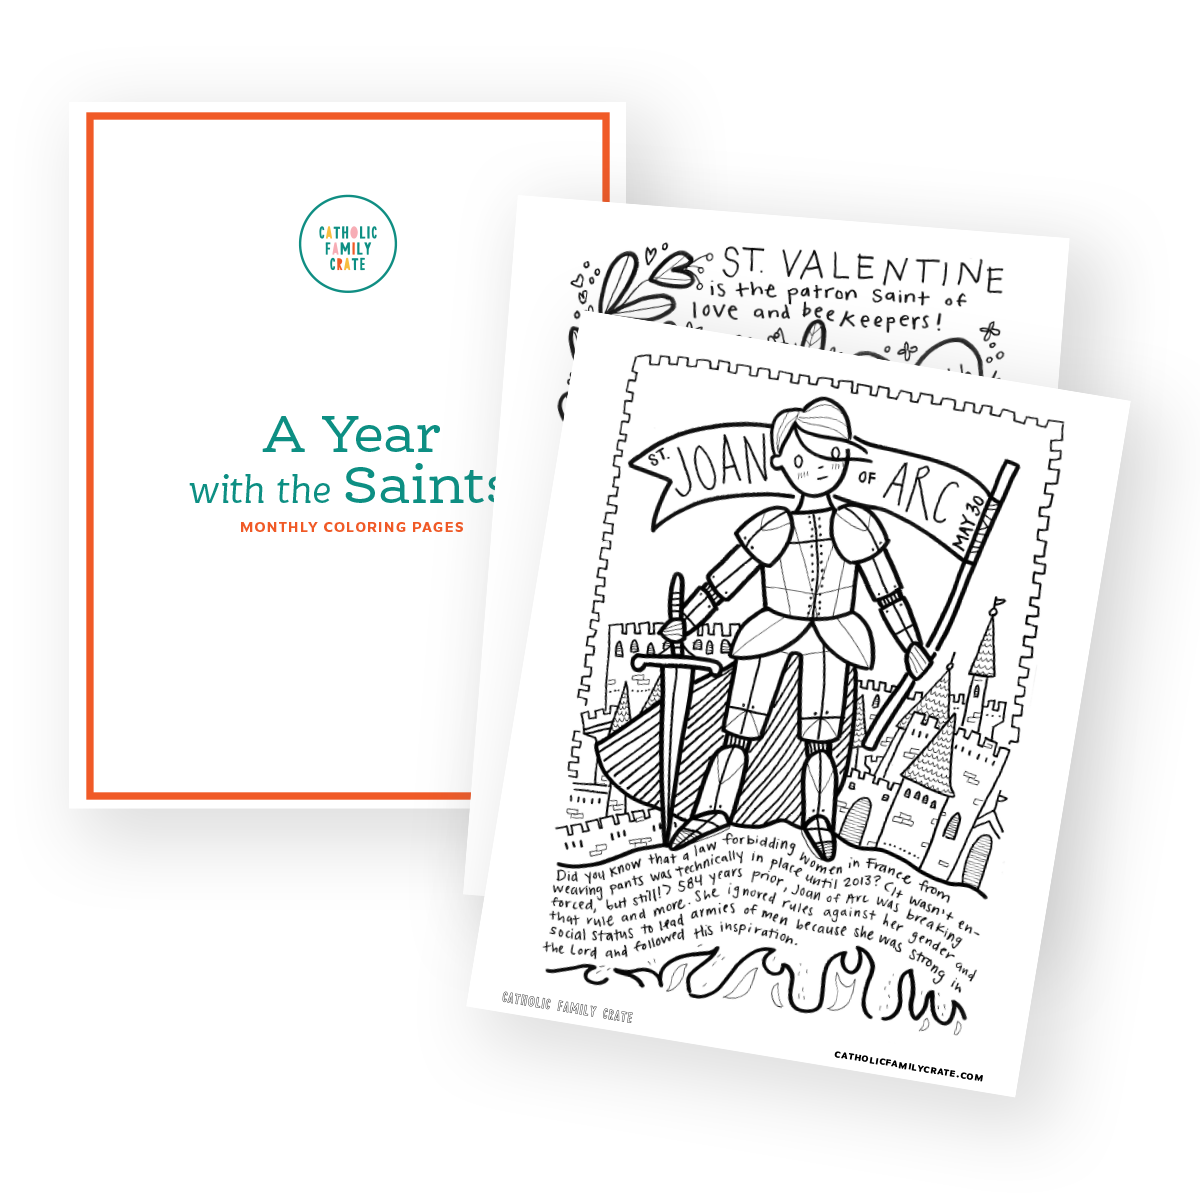 Coloring Book For Kids Ages 8-12: Printable Pages No Prep After